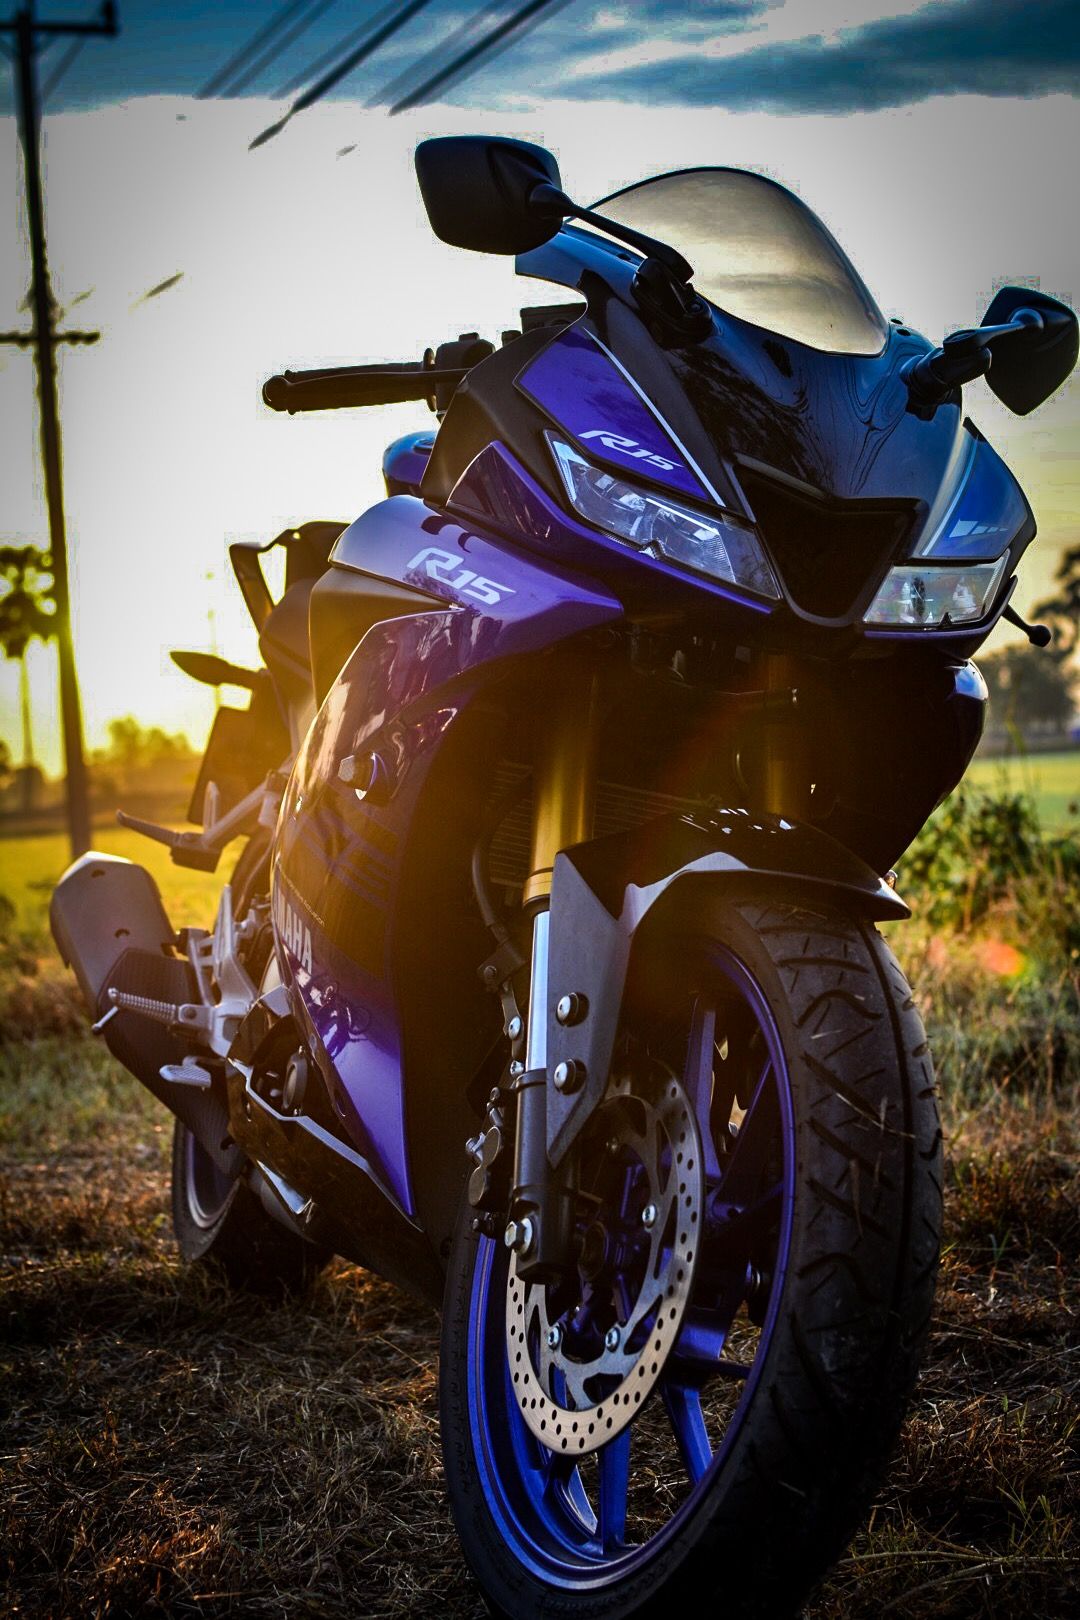 Yamaha R15 Wallpapers - Top 35 Best Yamaha R15 Backgrounds Download